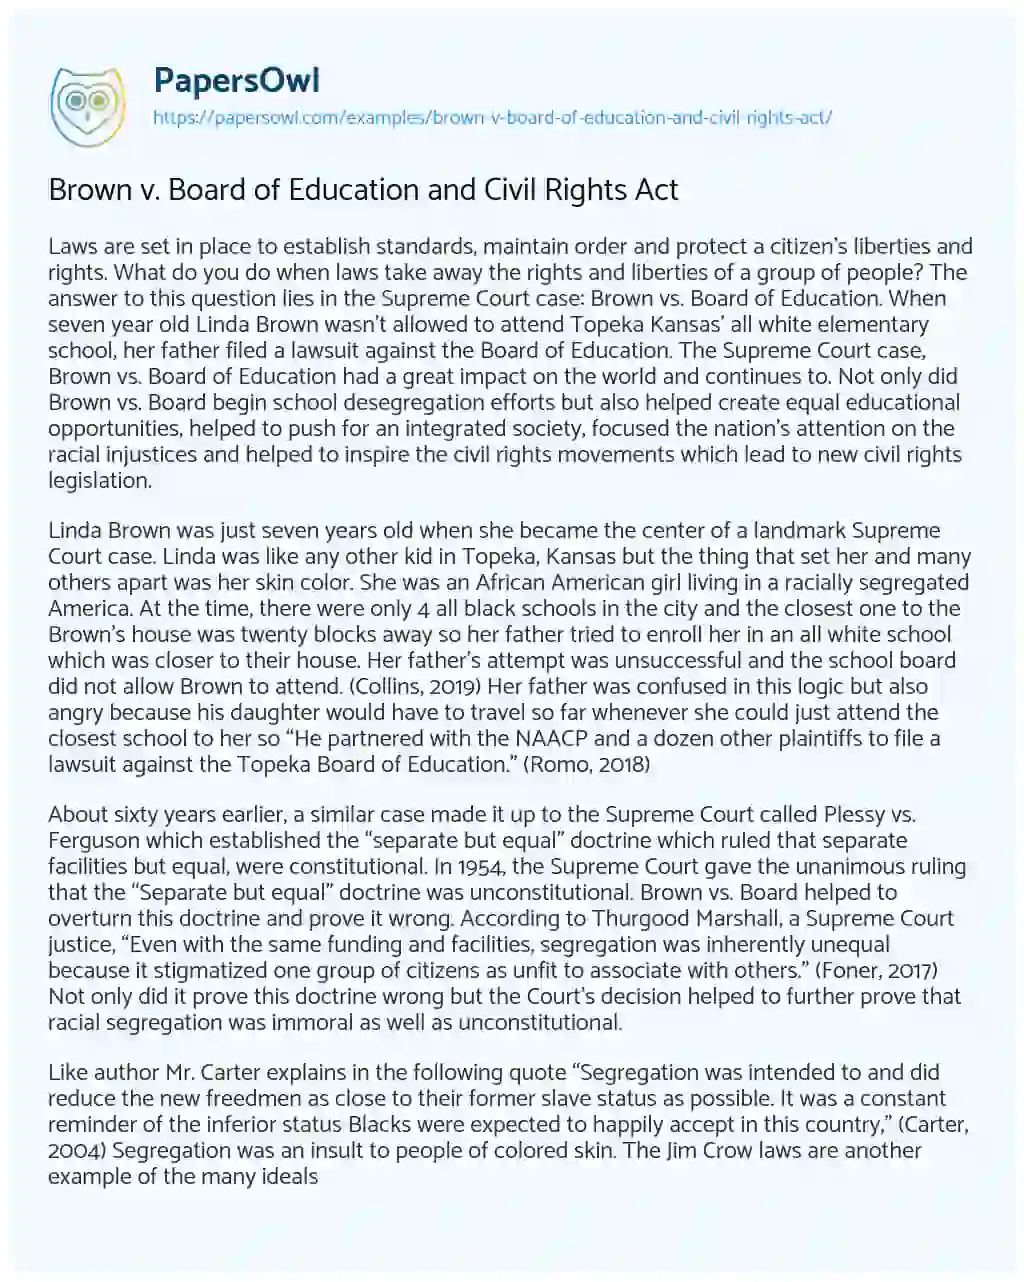 Essay on Brown V. Board of Education and Civil Rights Act